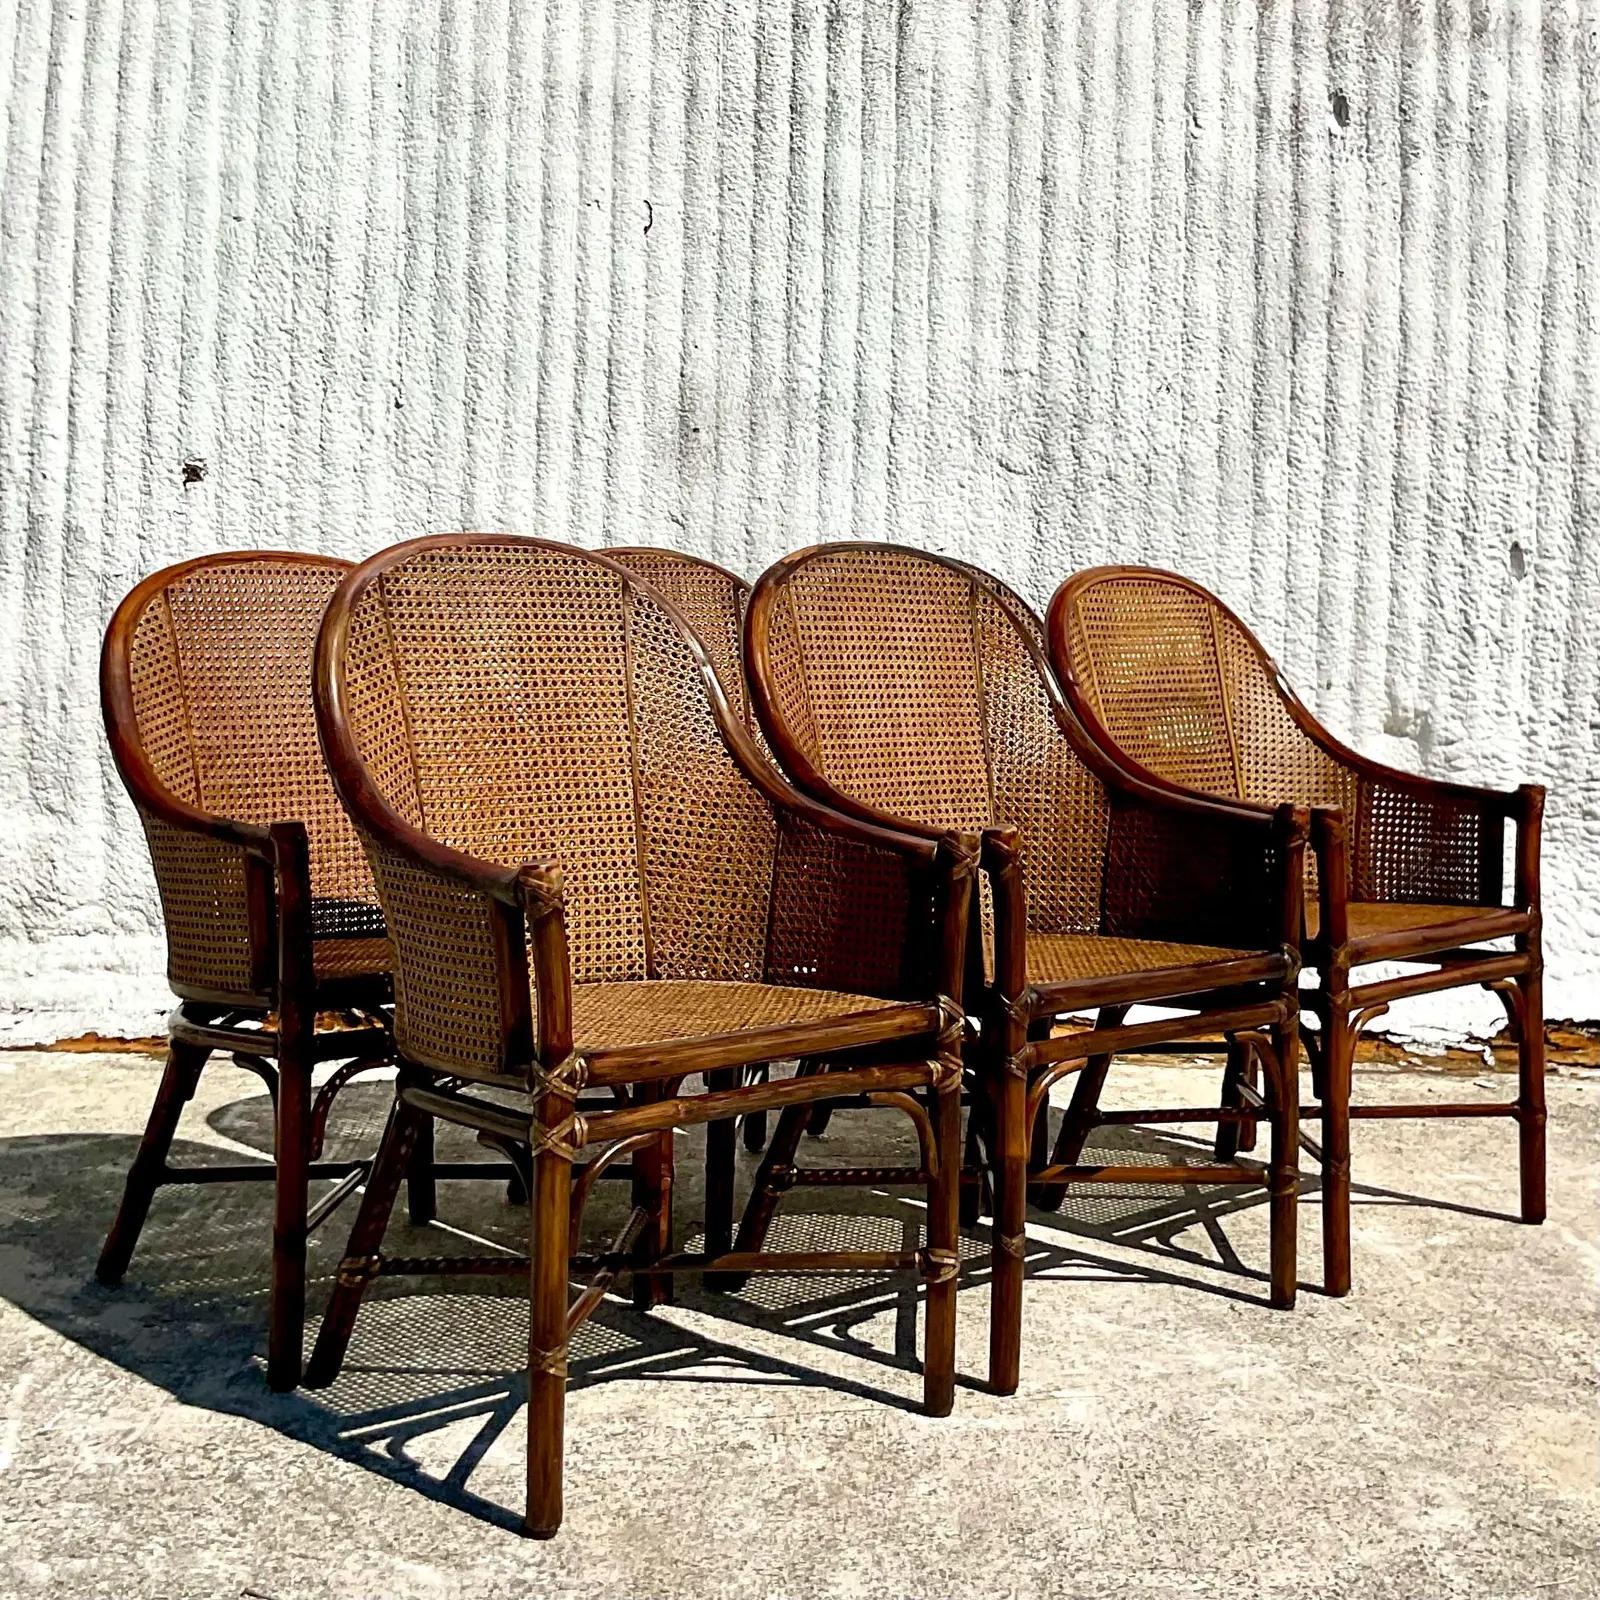 A fantastic set of 6 vintage Coastal dining chairs. Made by the iconic McGuire group in San Francisco. Gorgeous inset cane panels in a bent rattan frame. Acquired from a Palm Beach estate.

The chairs are in great vintage condition. Minor scuffs